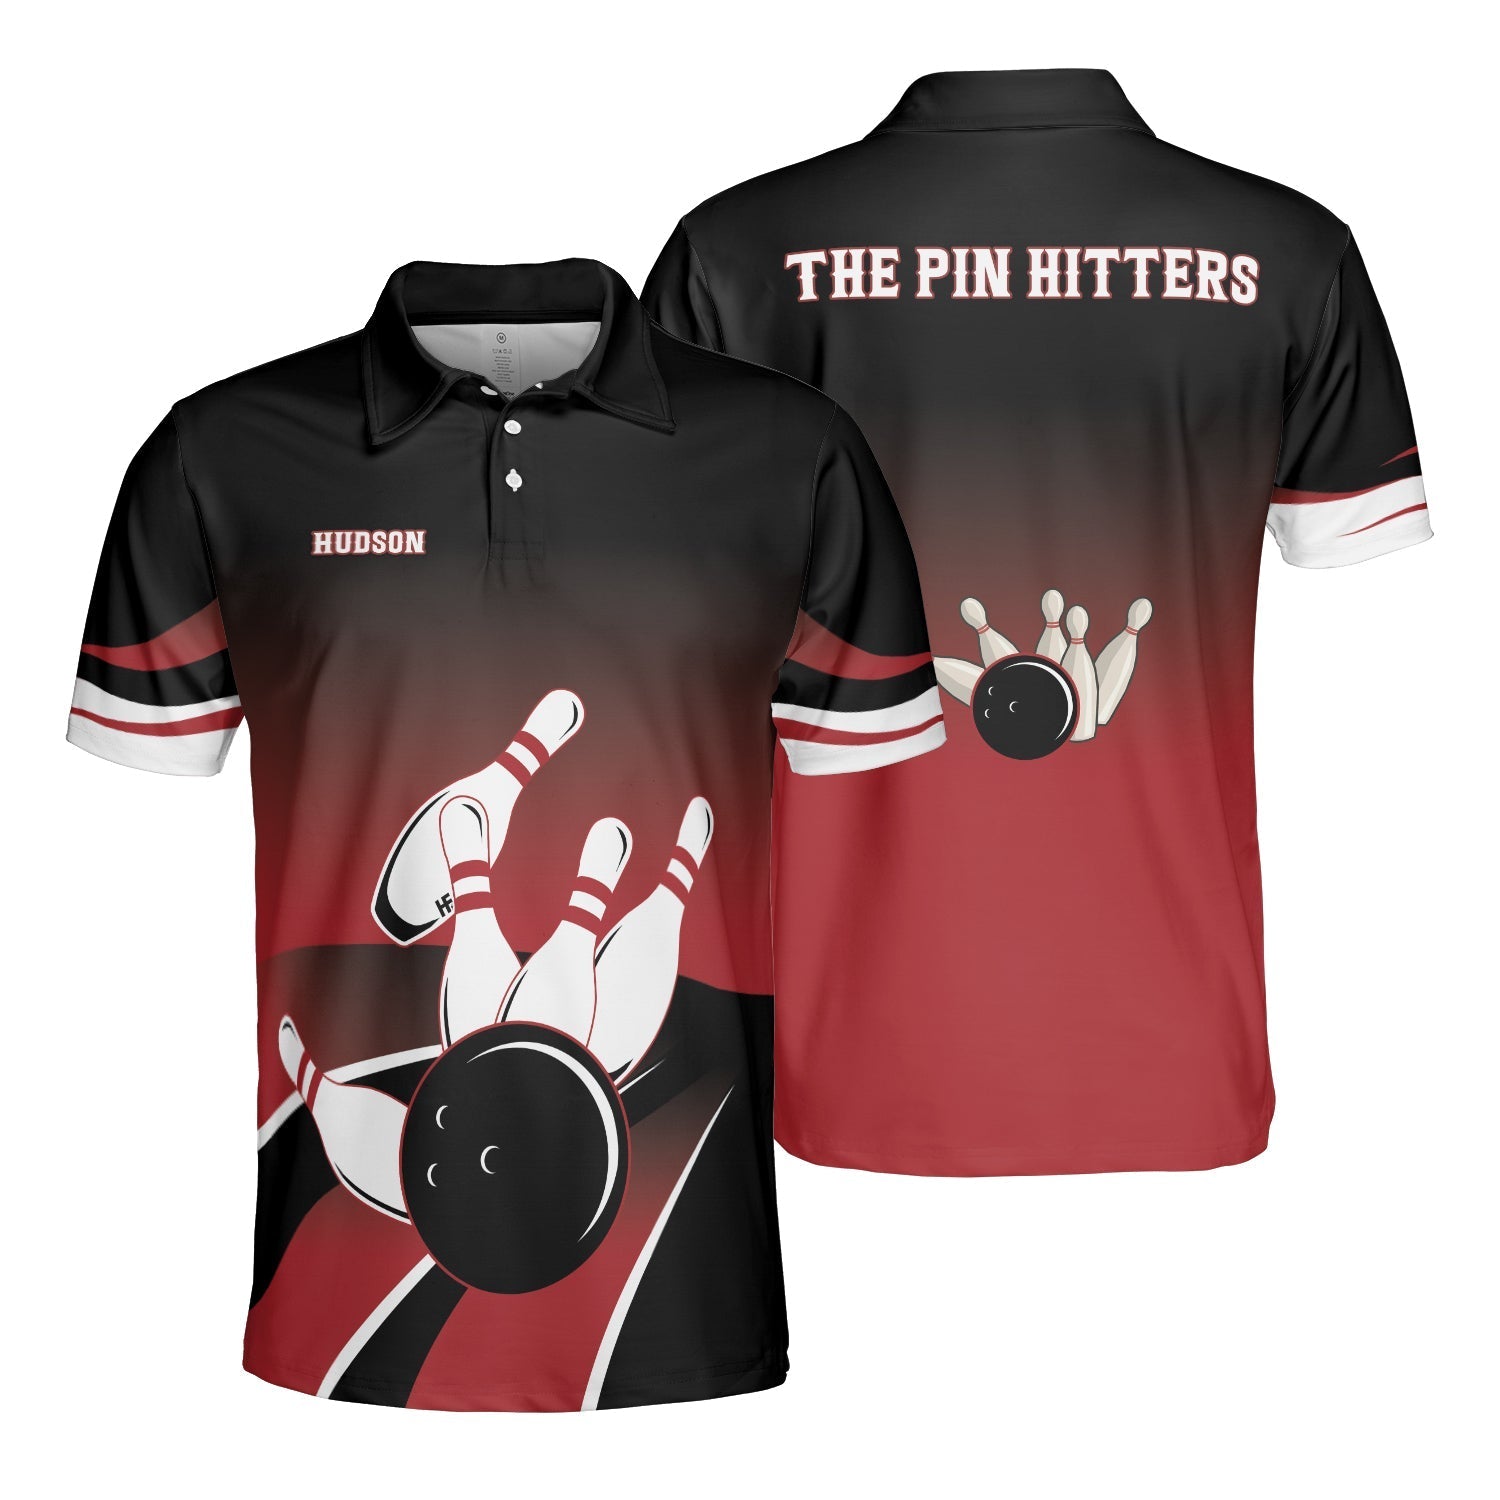 Customized Bowling Men Polo Shirt, The Pin Hitters Custom Polo Shirt - Perfect Gift For Men, Bowlers, Bowling Lovers